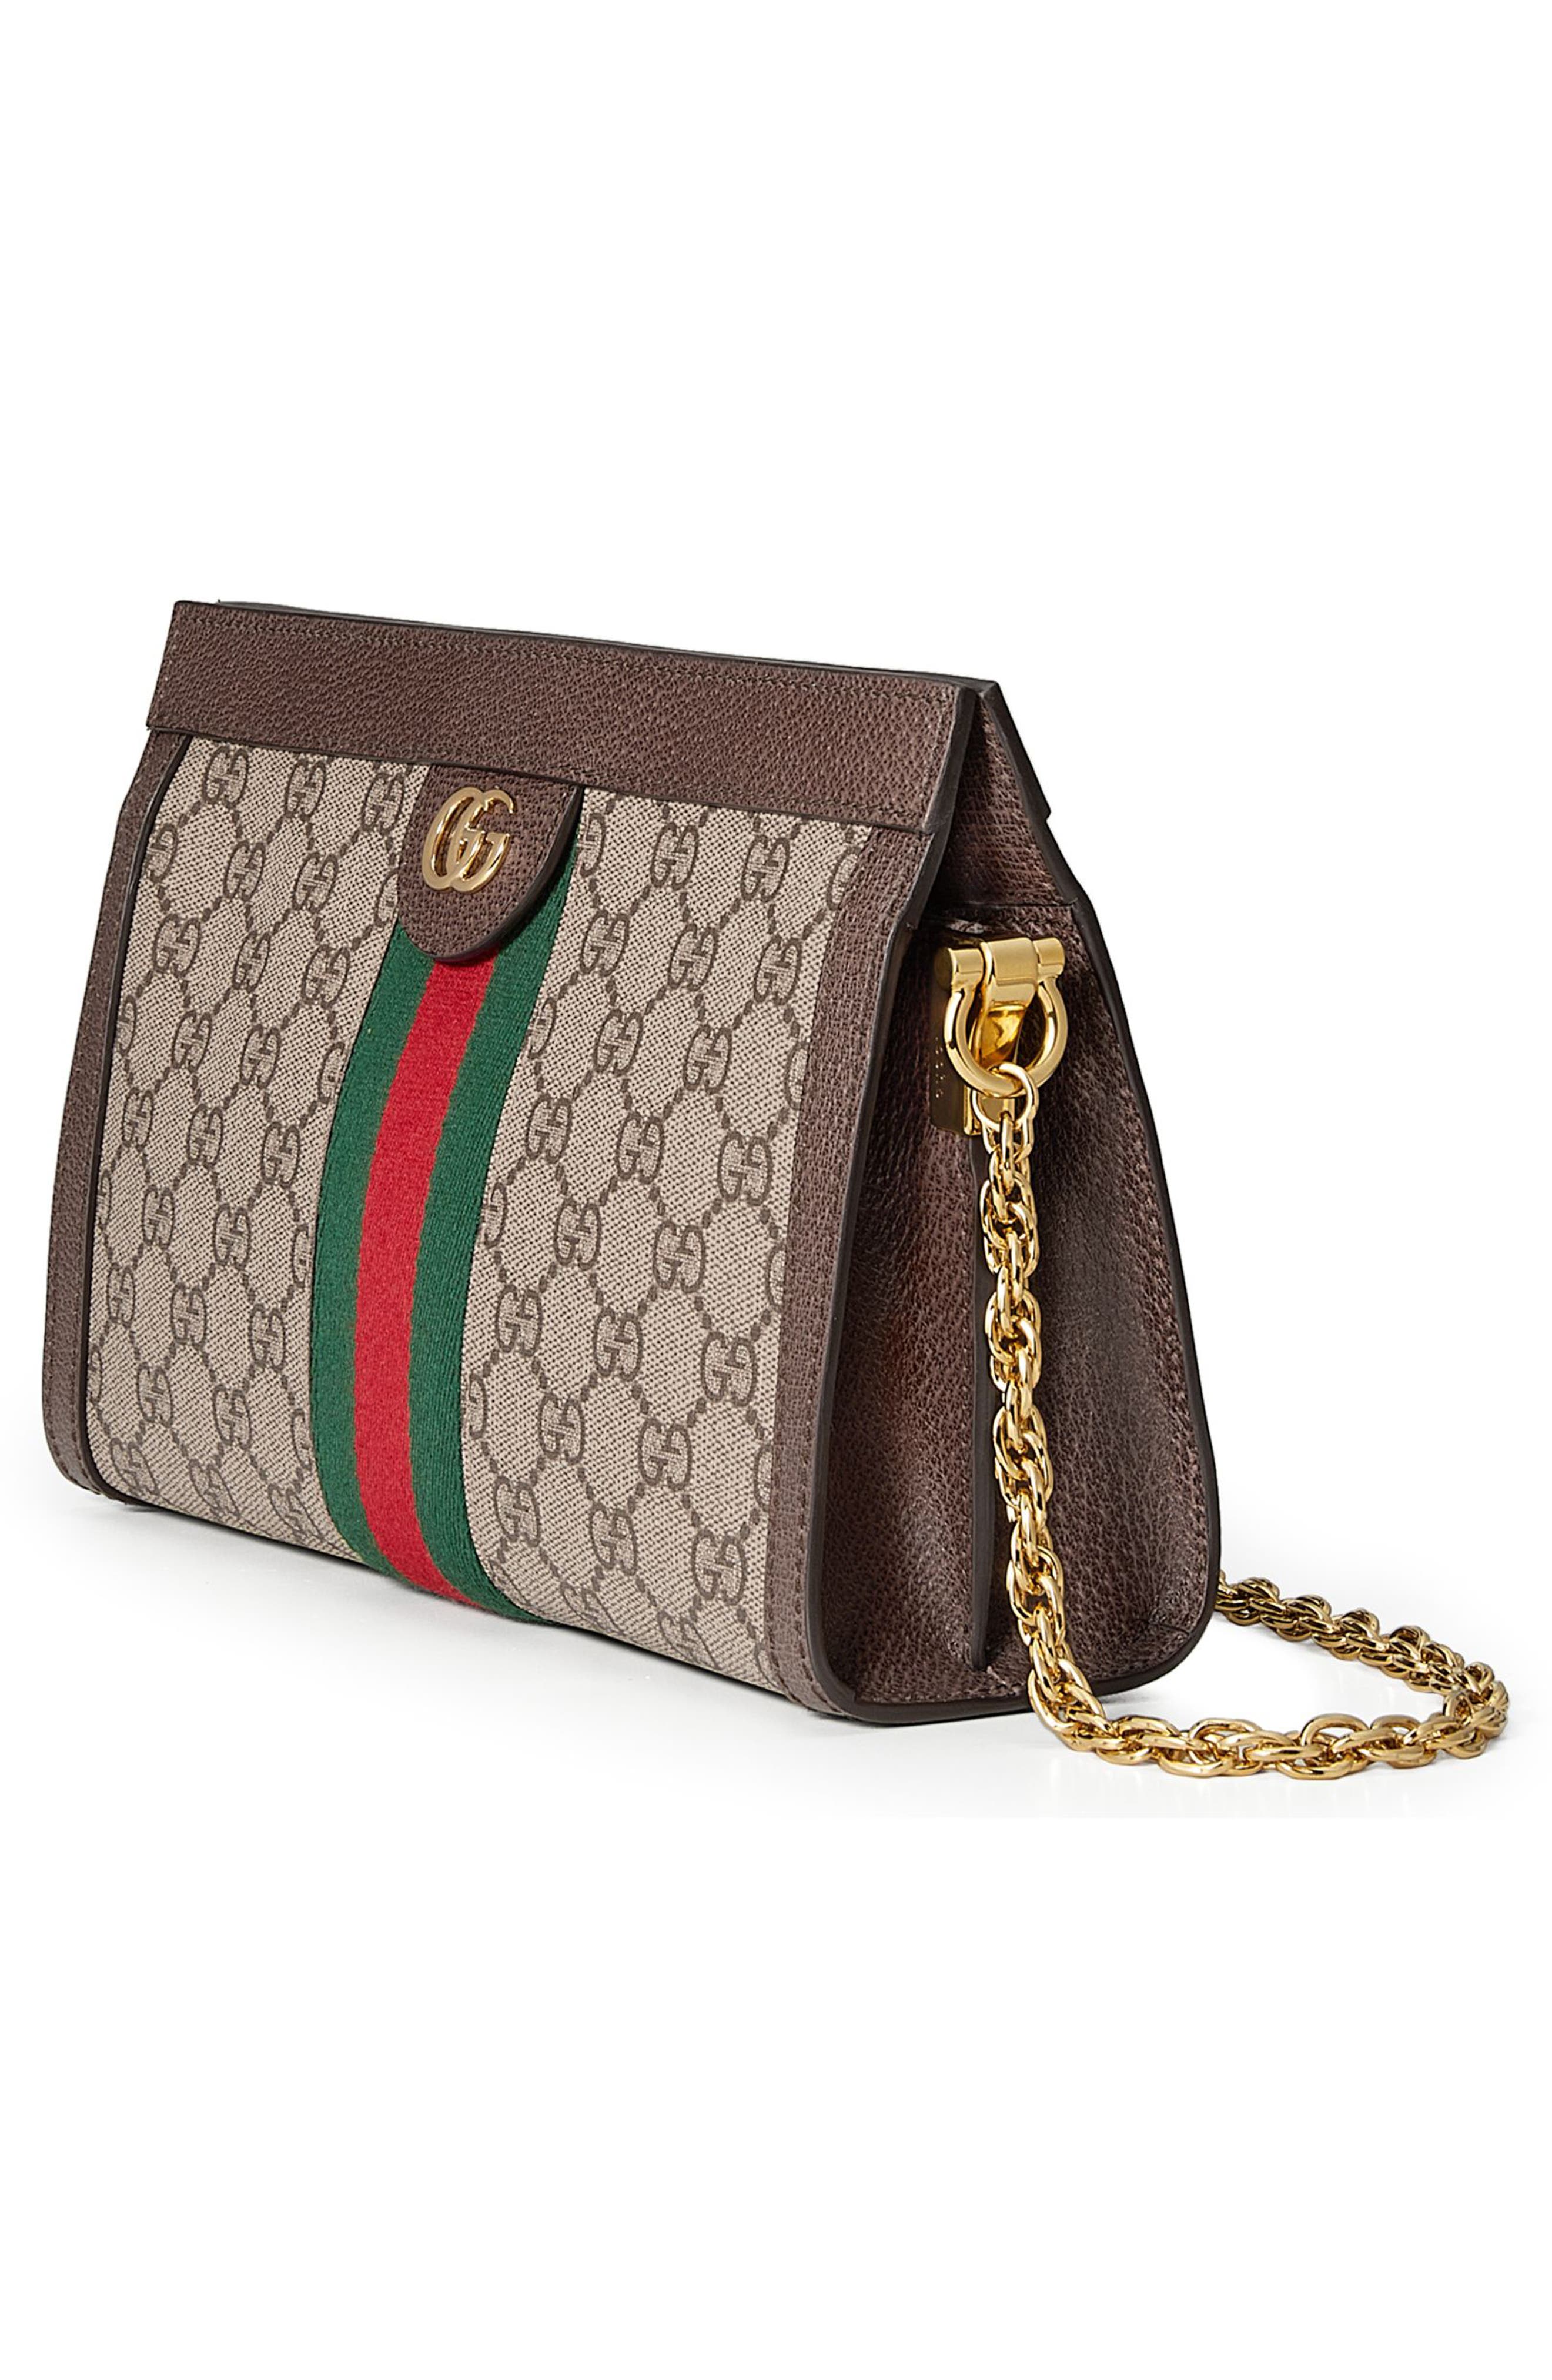 GUCCI Ophidia Textured Leather-Trimmed Printed Coated-Canvas Shoulder Bag, Brown | ModeSens